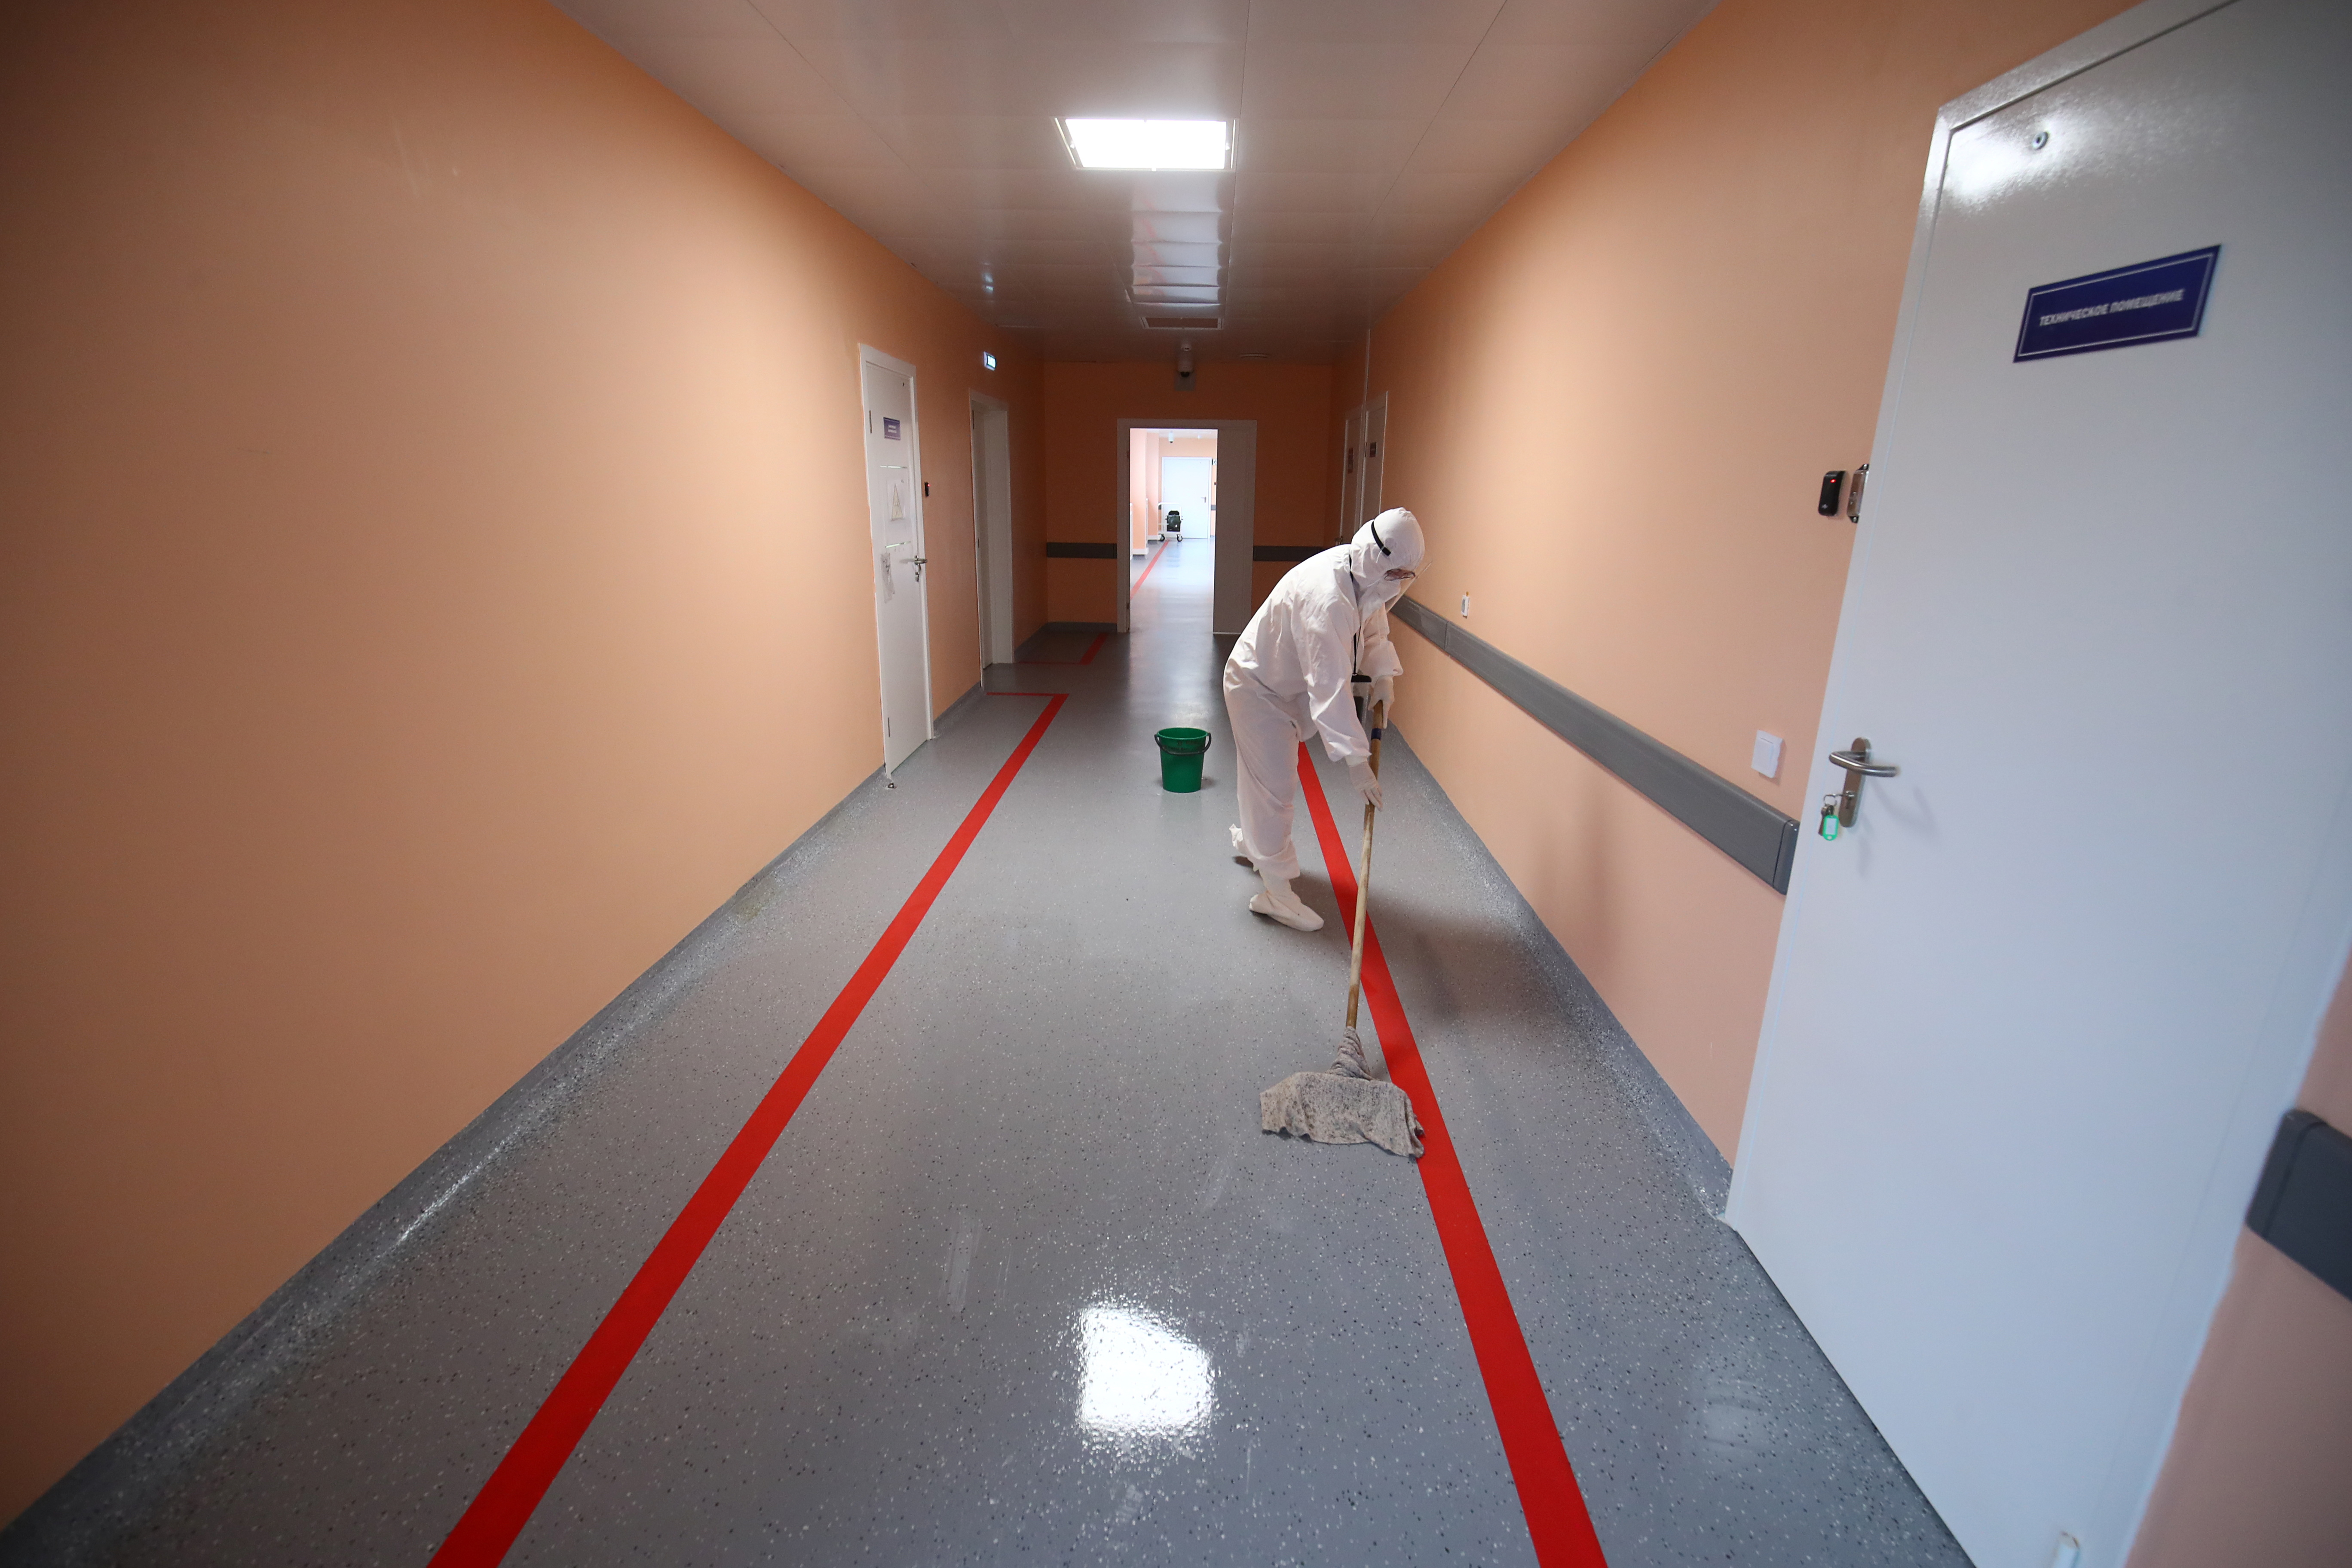 A worker cleans the floor in a local hospital where patients suffering from the coronavirus disease (COVID-19) are treated in Kalach-on-Don